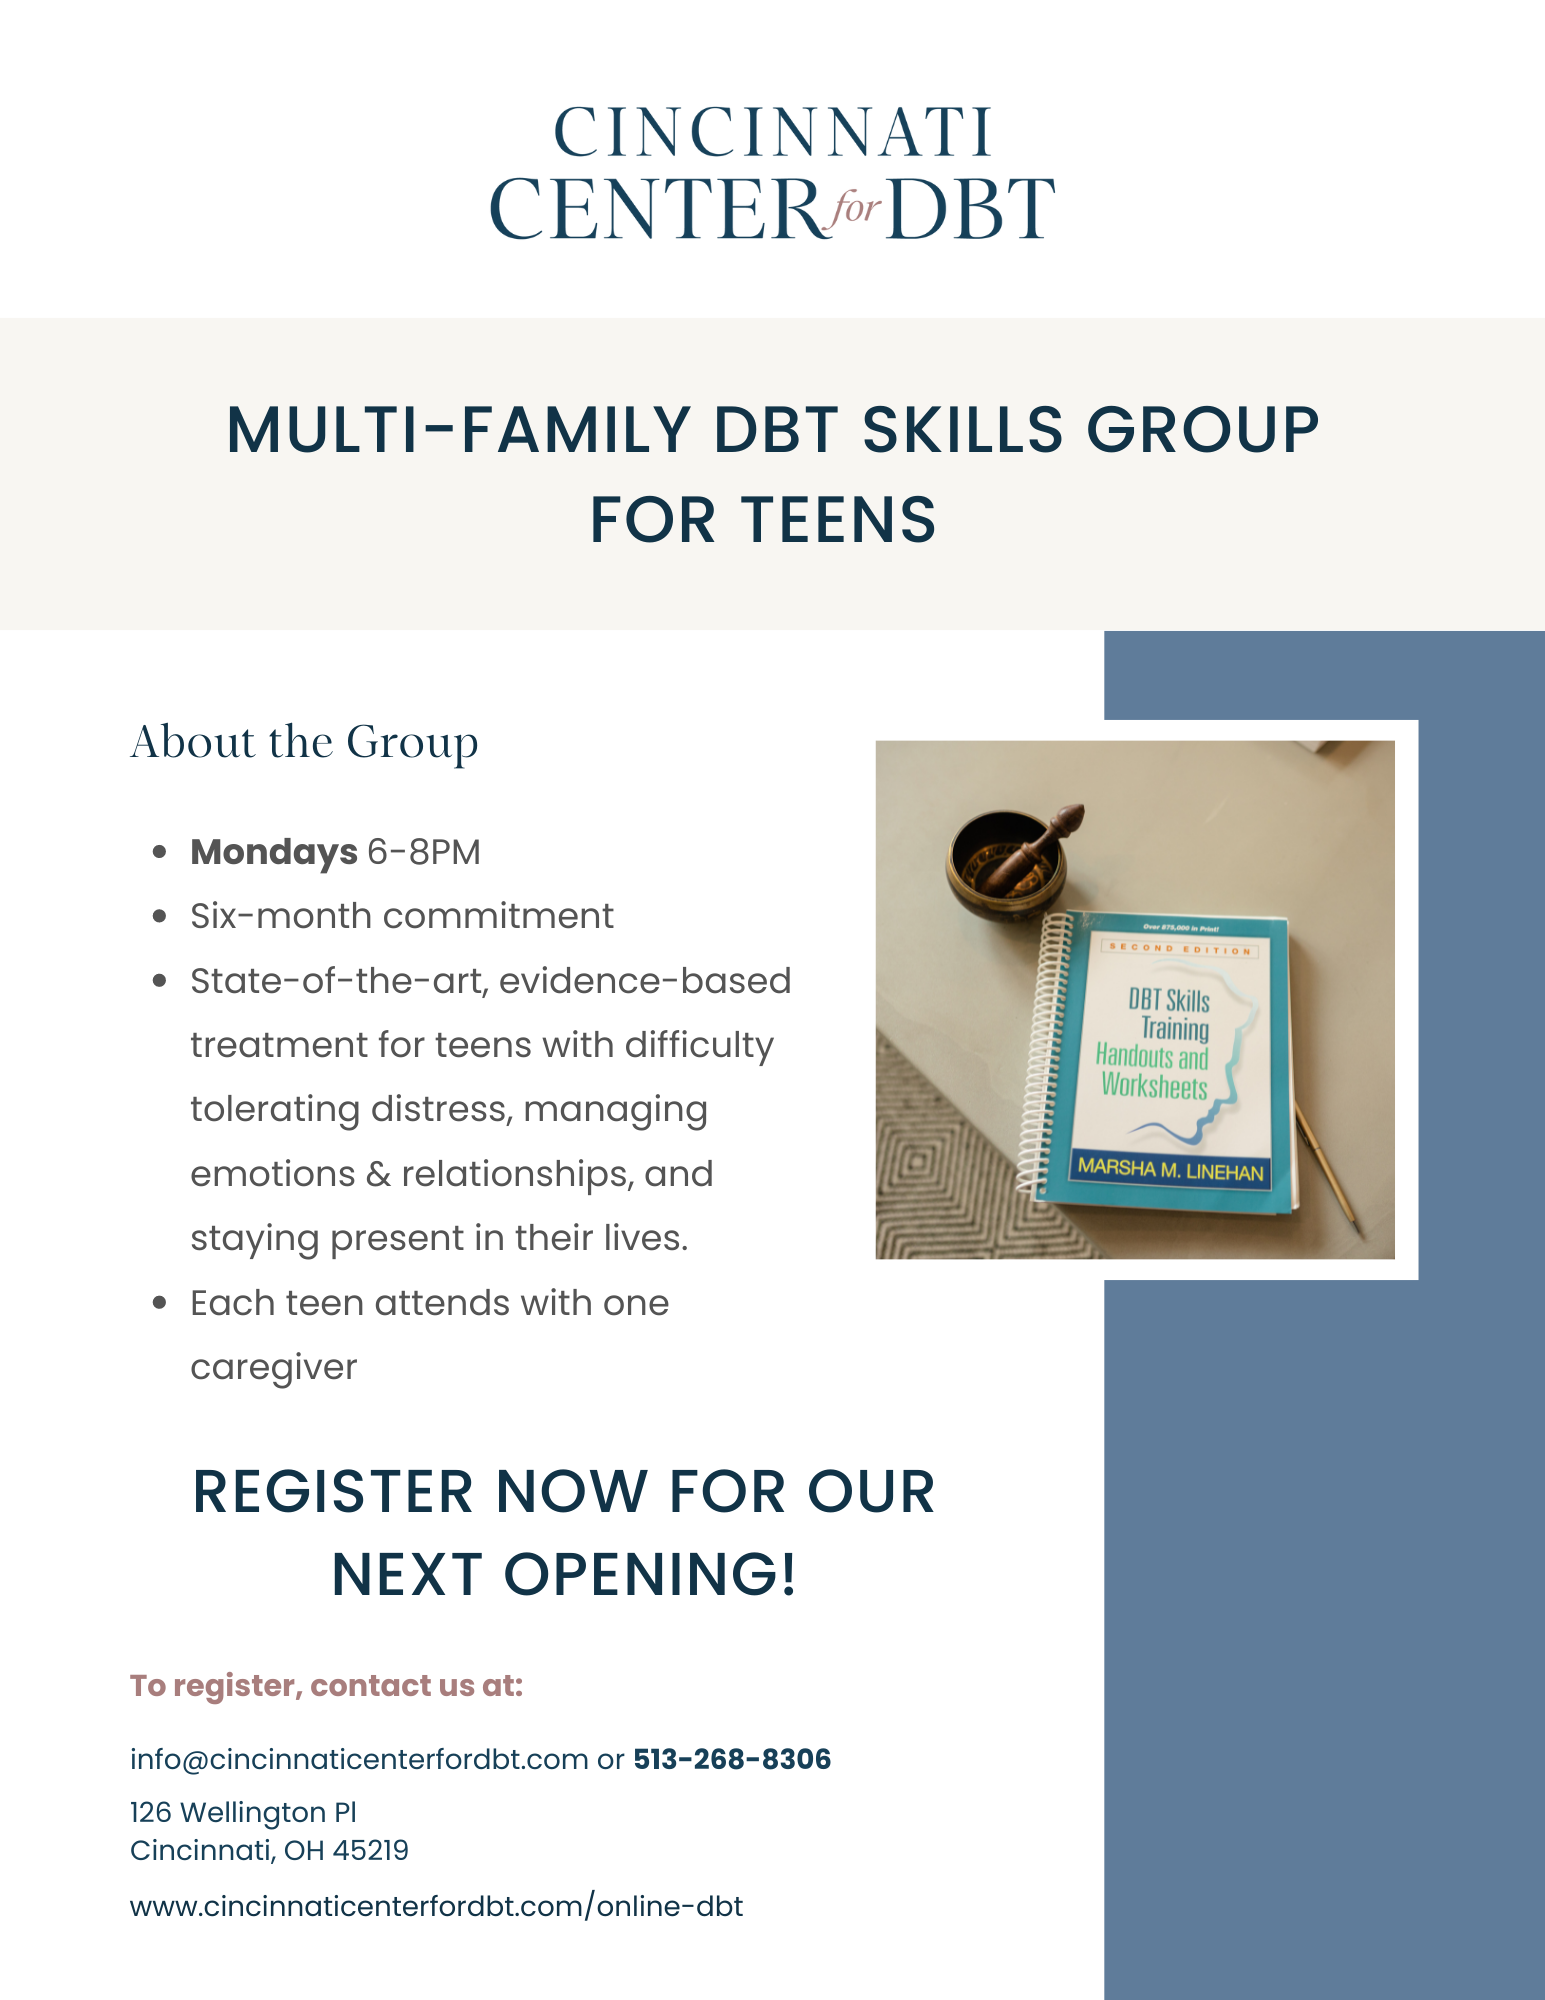 Flyer about Cincinnati Center for DBT's multi-family DBT skills training groups for adolescent teens and caregivers